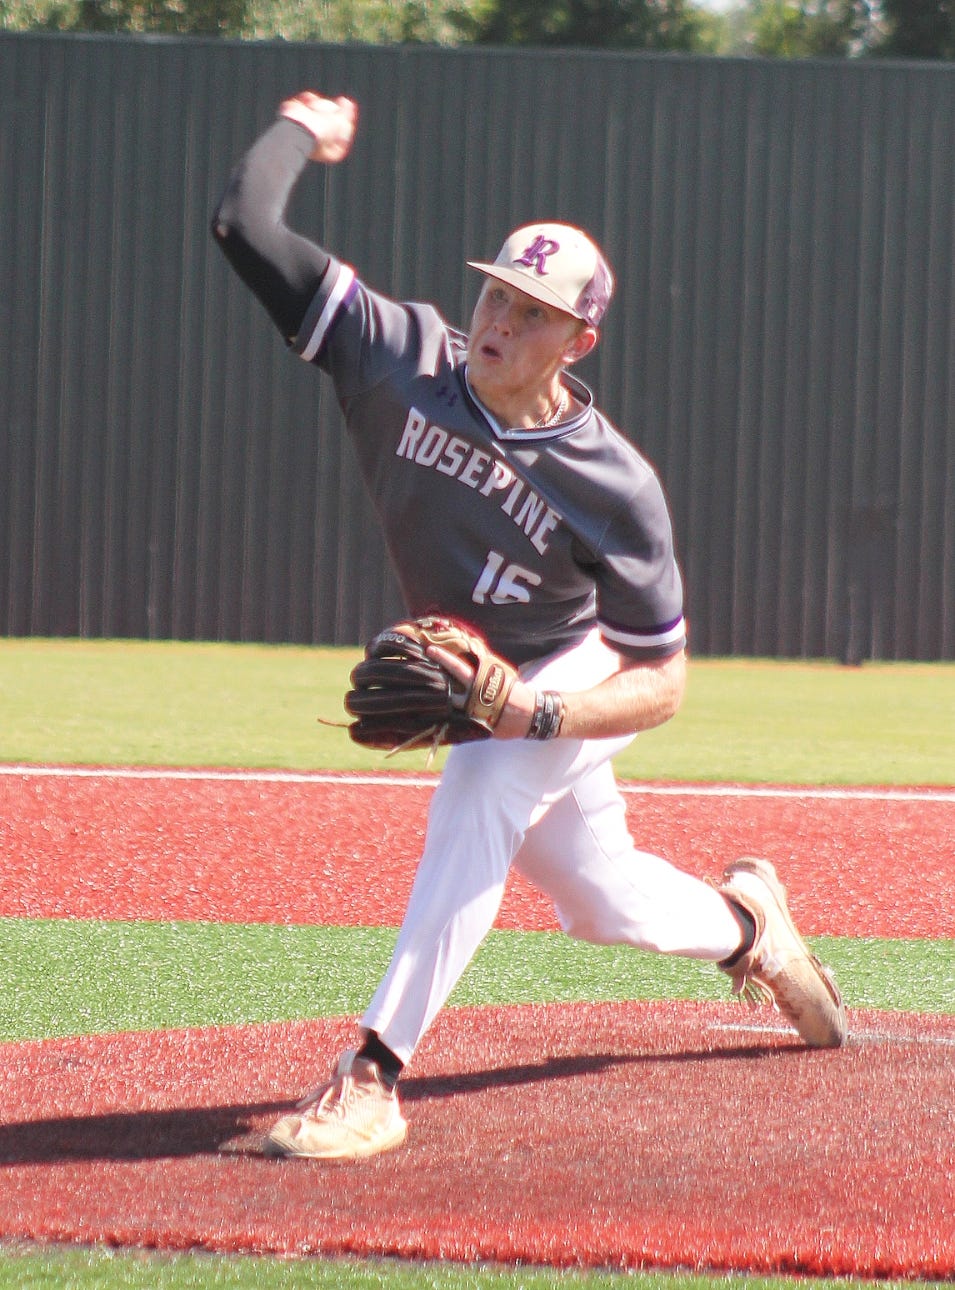 Rosepine junior Ethan Frey struck out 12 Doyle batters, while Logan Calcote scored the lone run in the sixth as the Eagles beat the Tigers, 1-0, in the Class 2A state championship game on Friday in Sulphur.